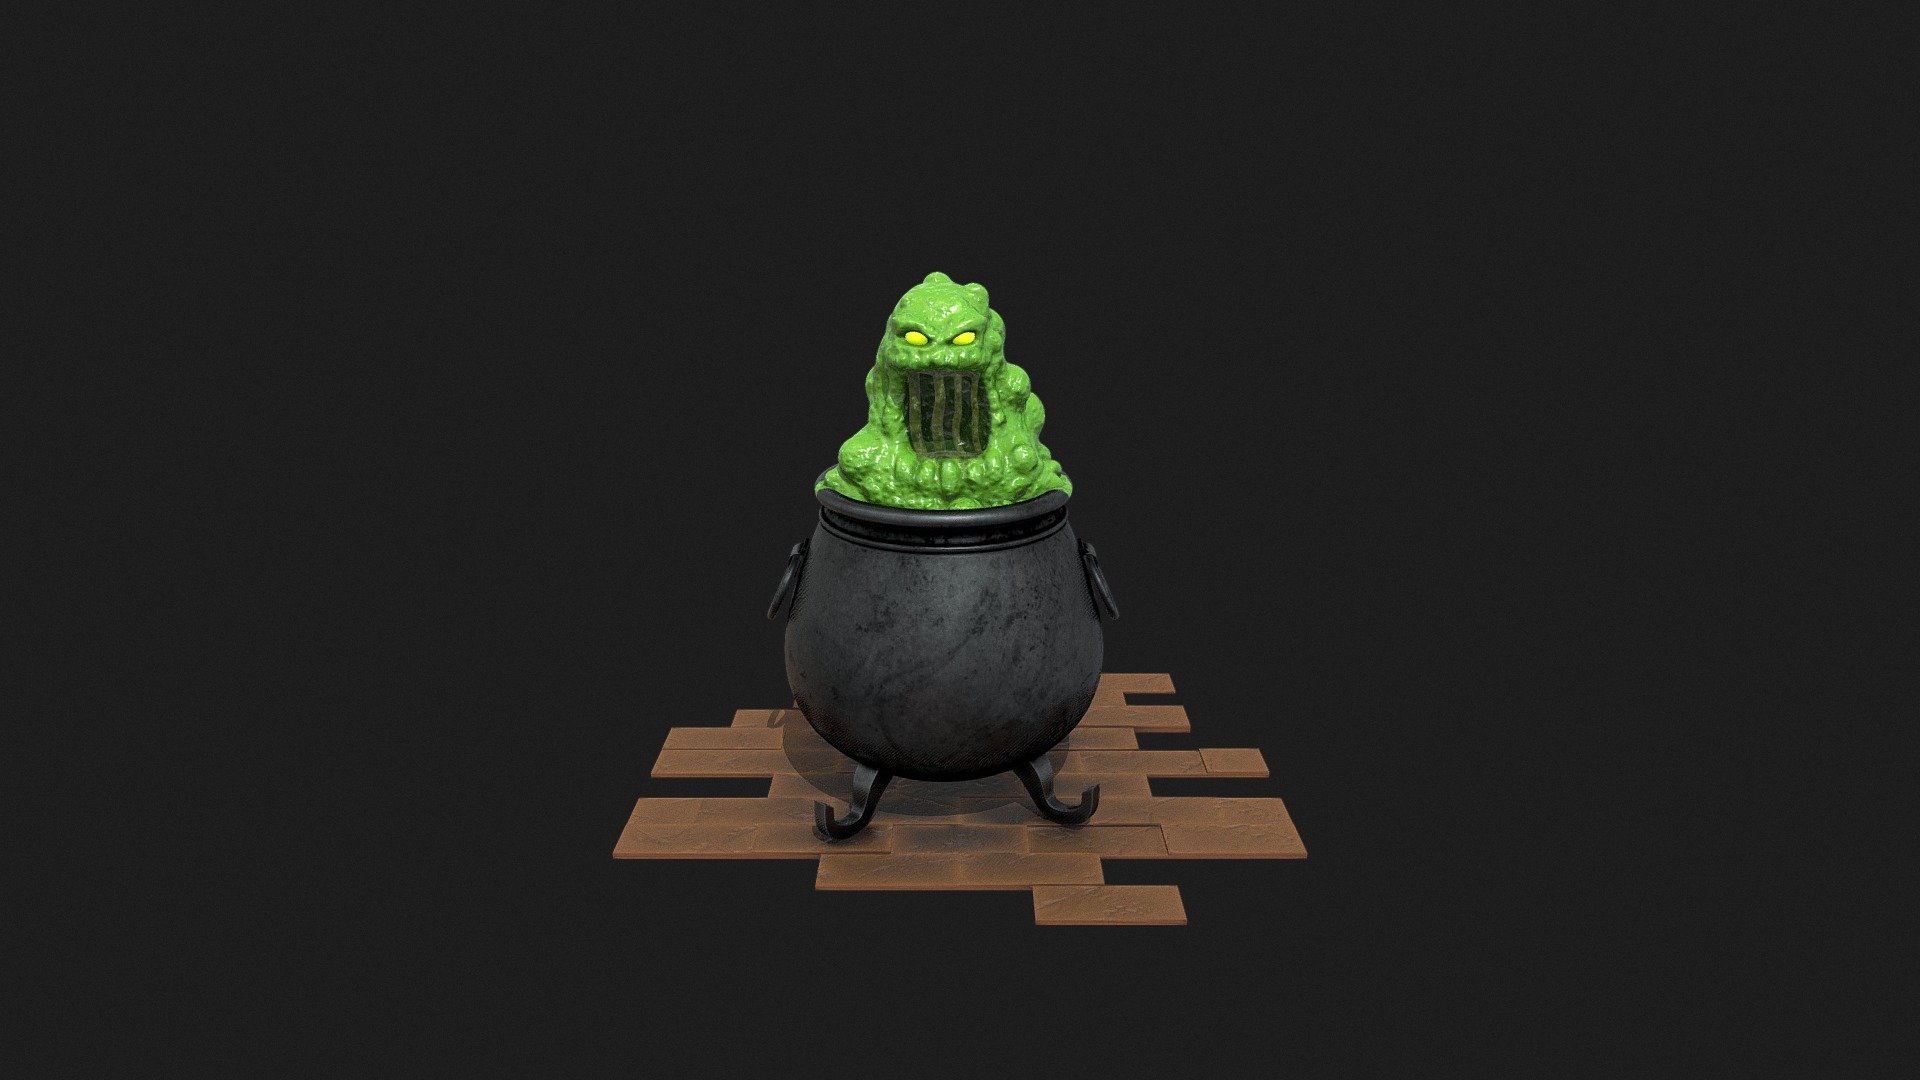 Another stylized model I tried my hand at, was fun working with different materials and exploring more variants of stylized textures and going back into Zbrush and sculpting the slime monster 3d model